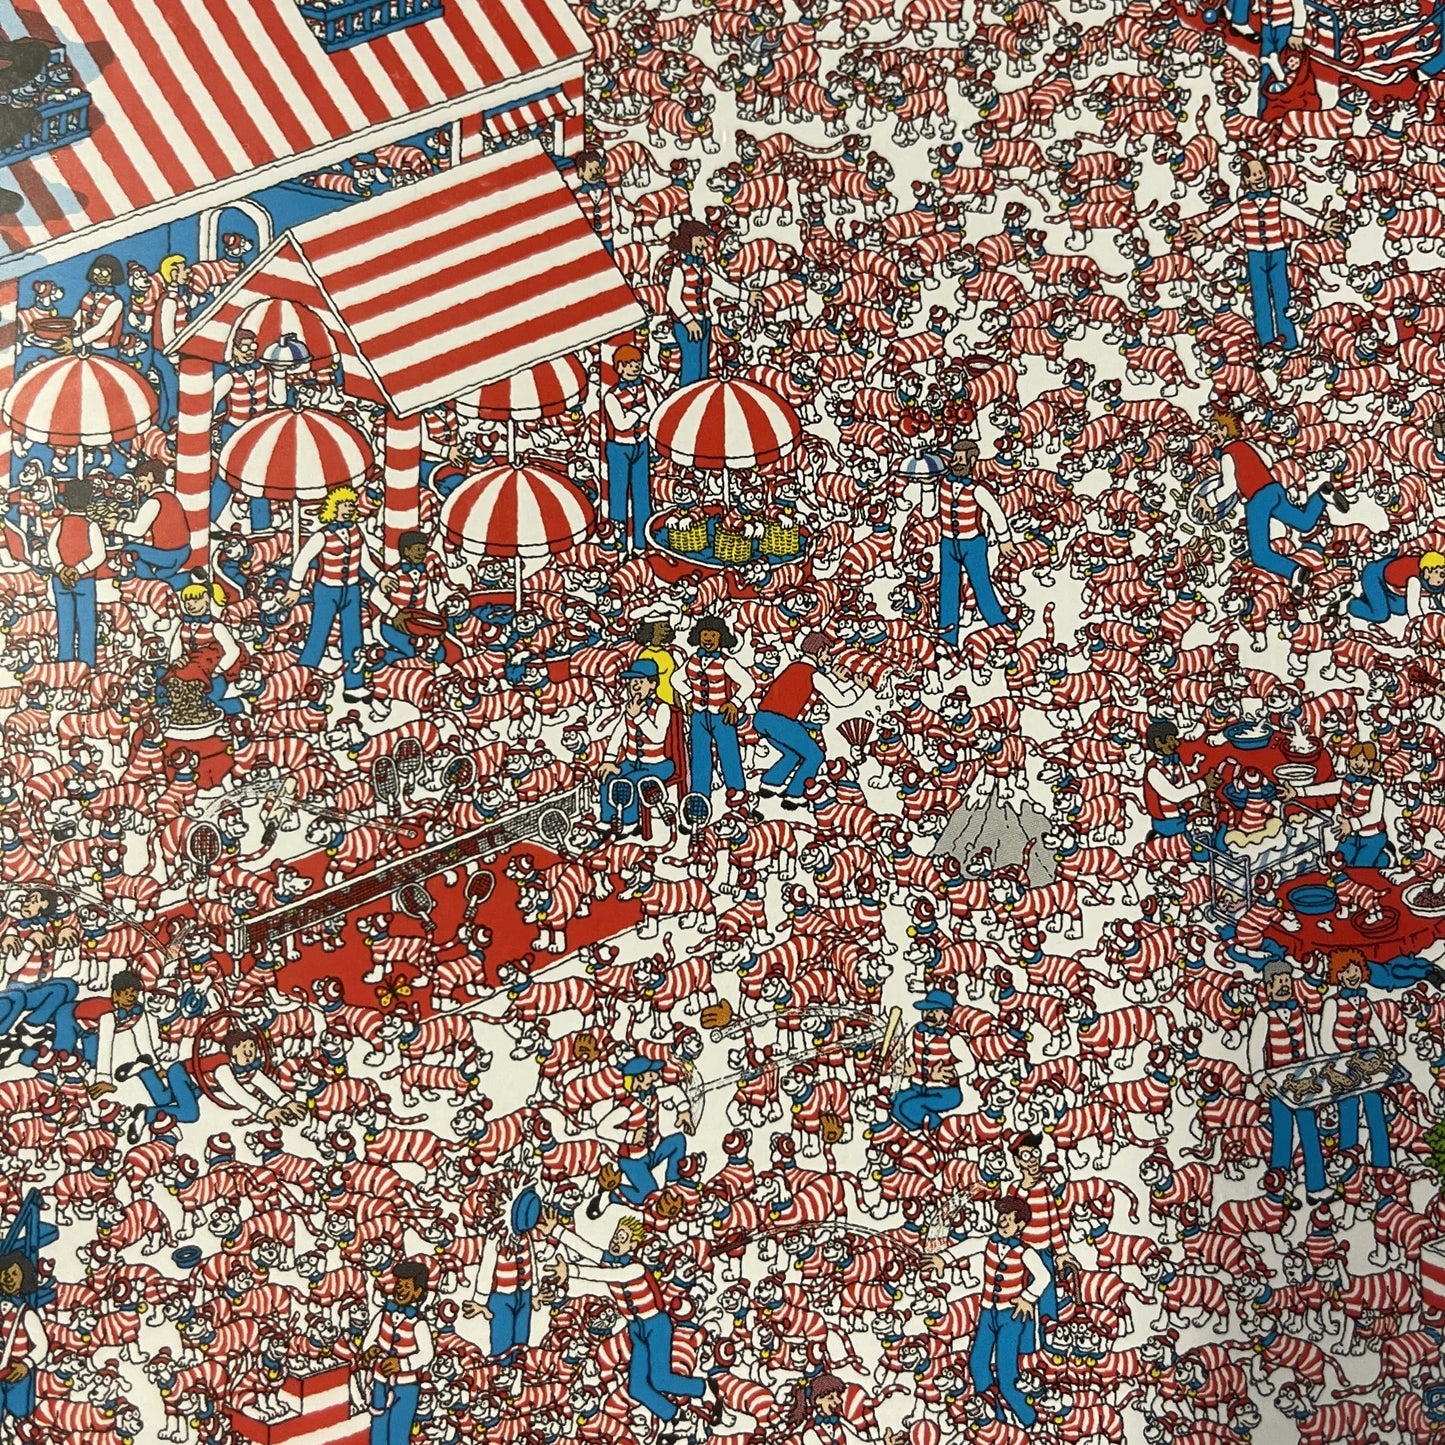 Where's Wally Land of Woofs jigsaw puzzle.